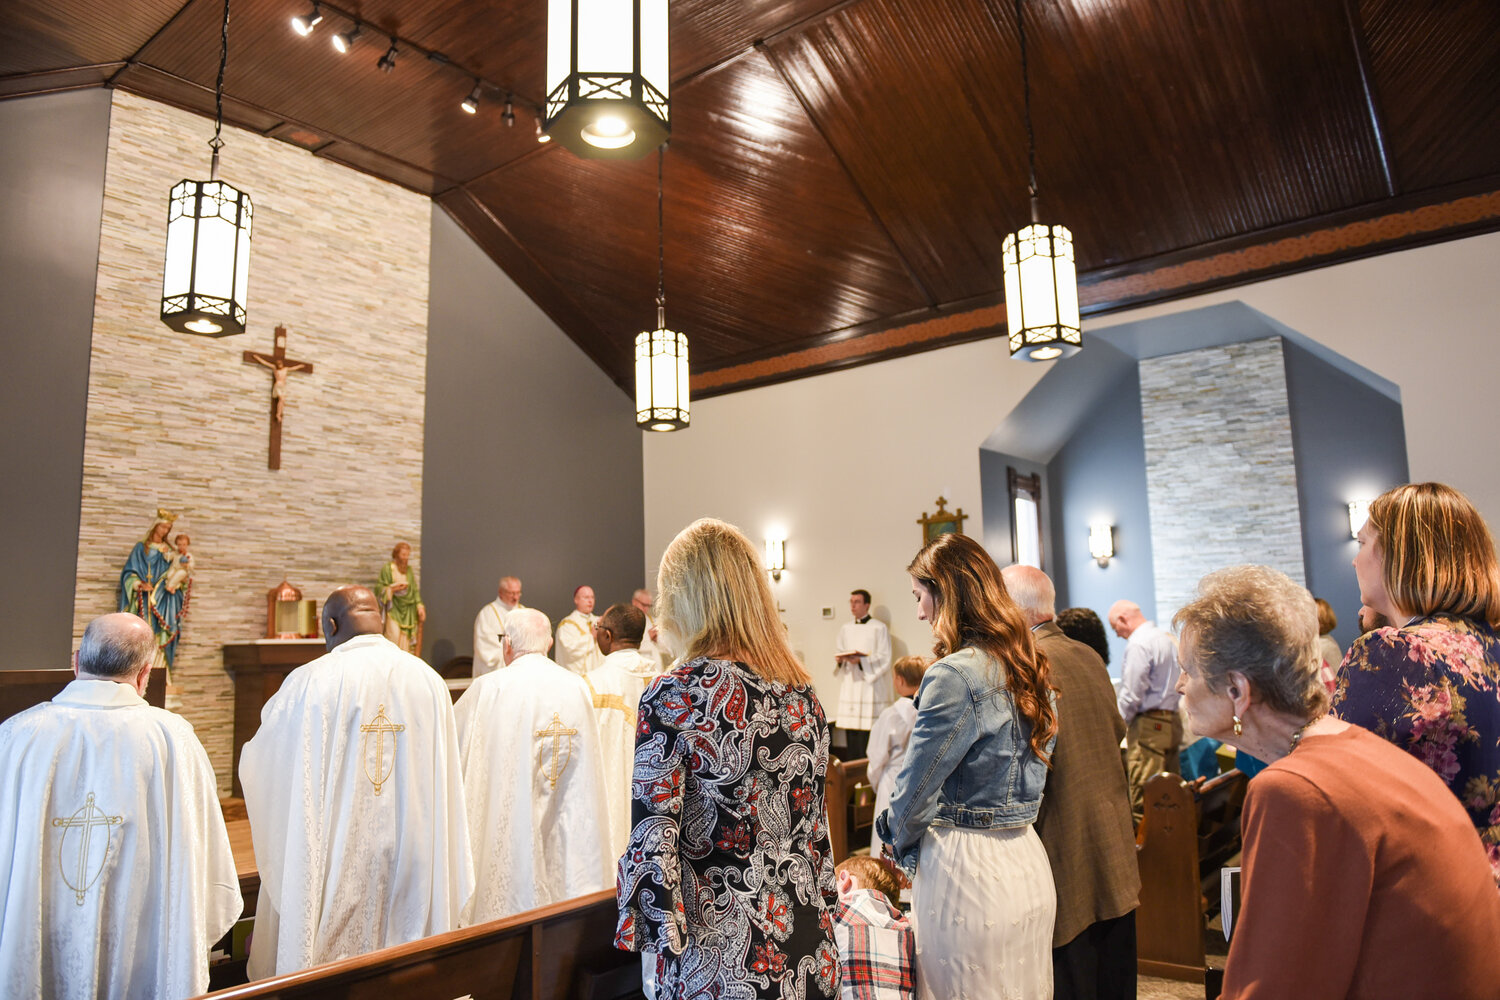 Bishop W. Shawn McKnight leads the faithful in prayer during the Rededication Mass for St. Jude Thaddeus Church in Mokane on Oct. 22. The rededication capped a year’s worth of renovations to the 1895-vintage church.